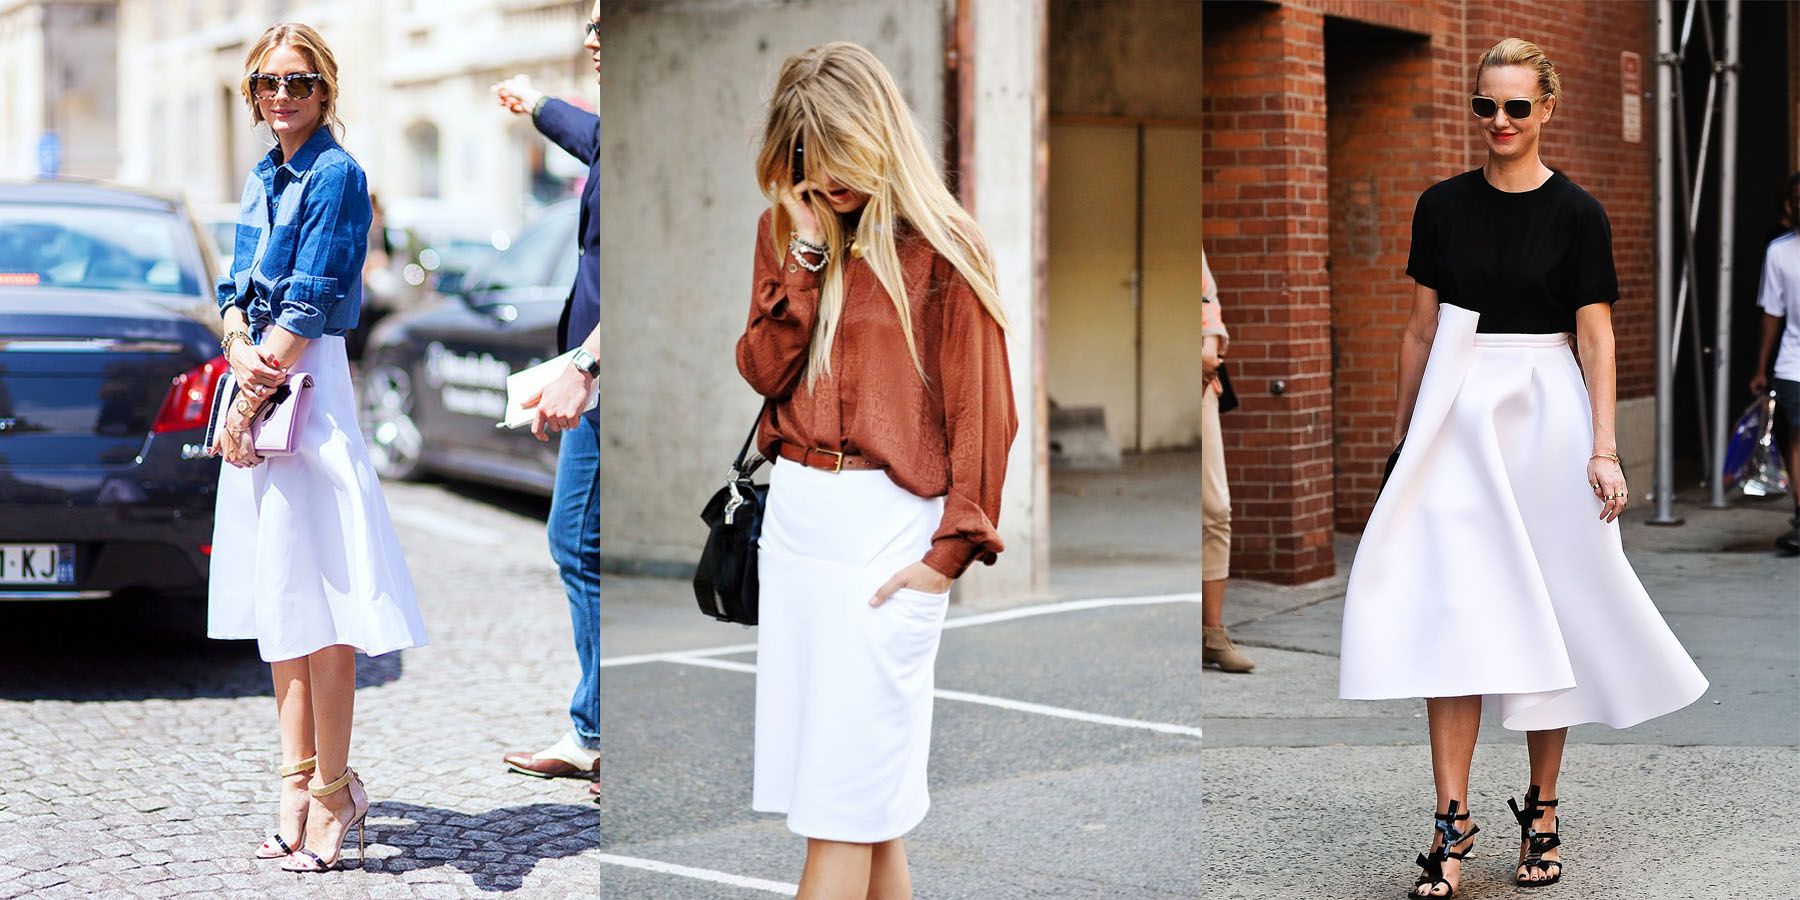 With White Skirt, You Can Maximize Blogger's and Fashionista's Style with This Inspiration!